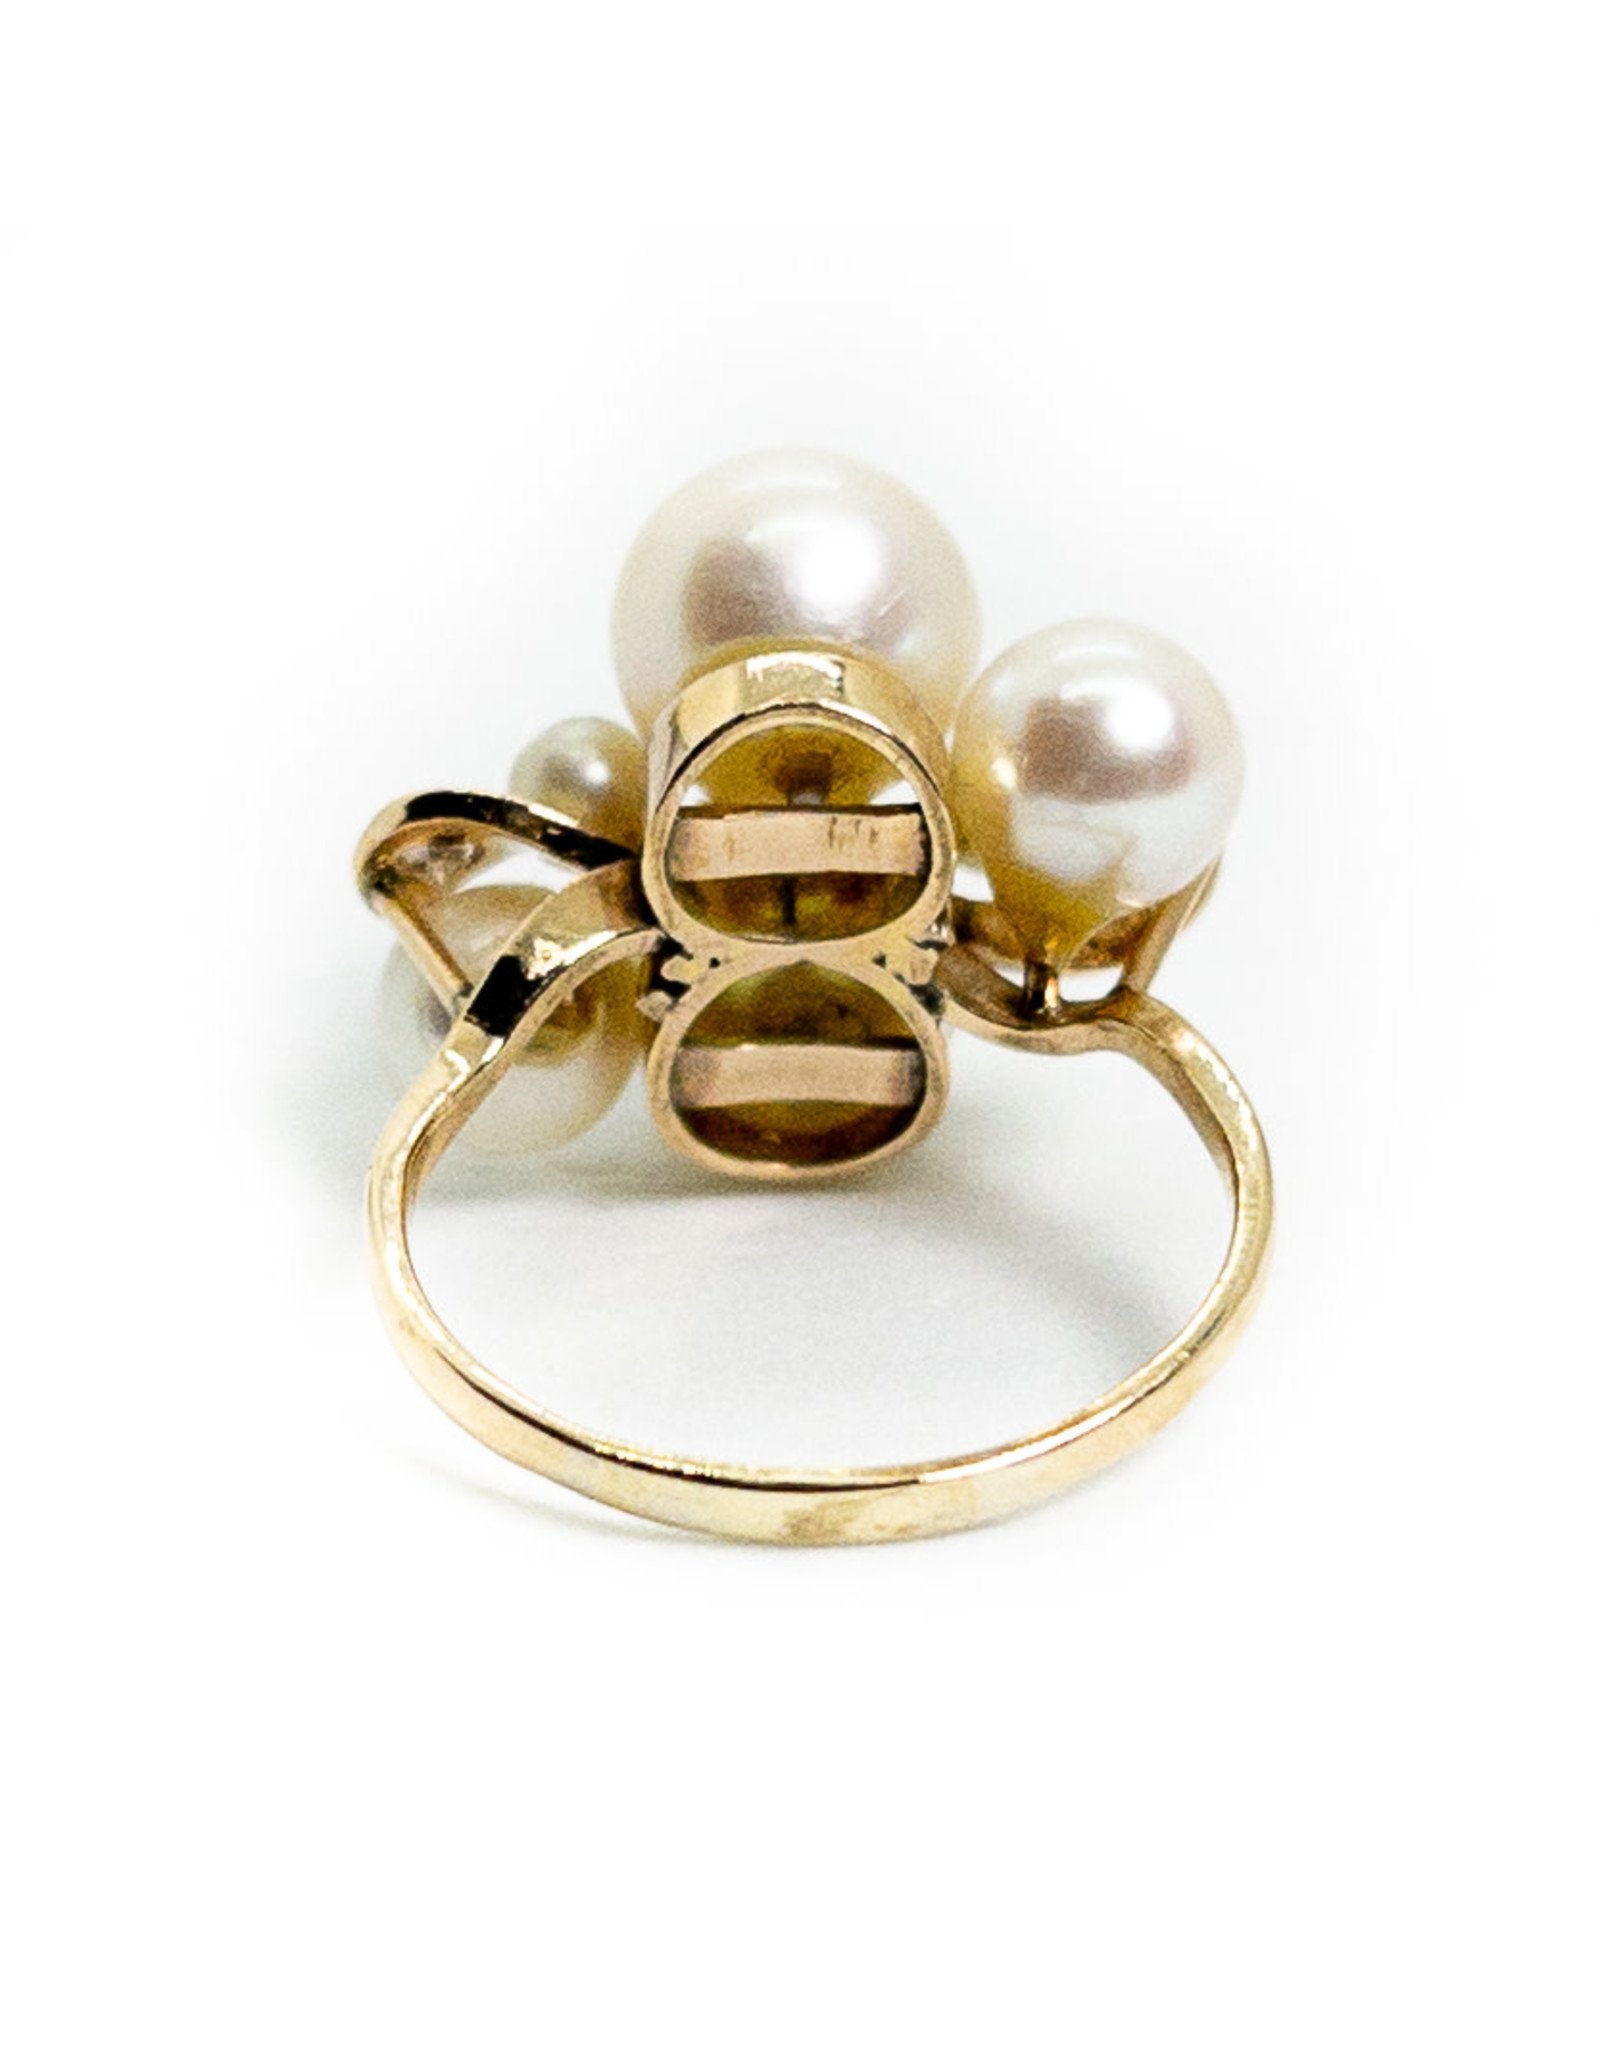 14K Gold Ring with 6 Pearls 2 Diamonds